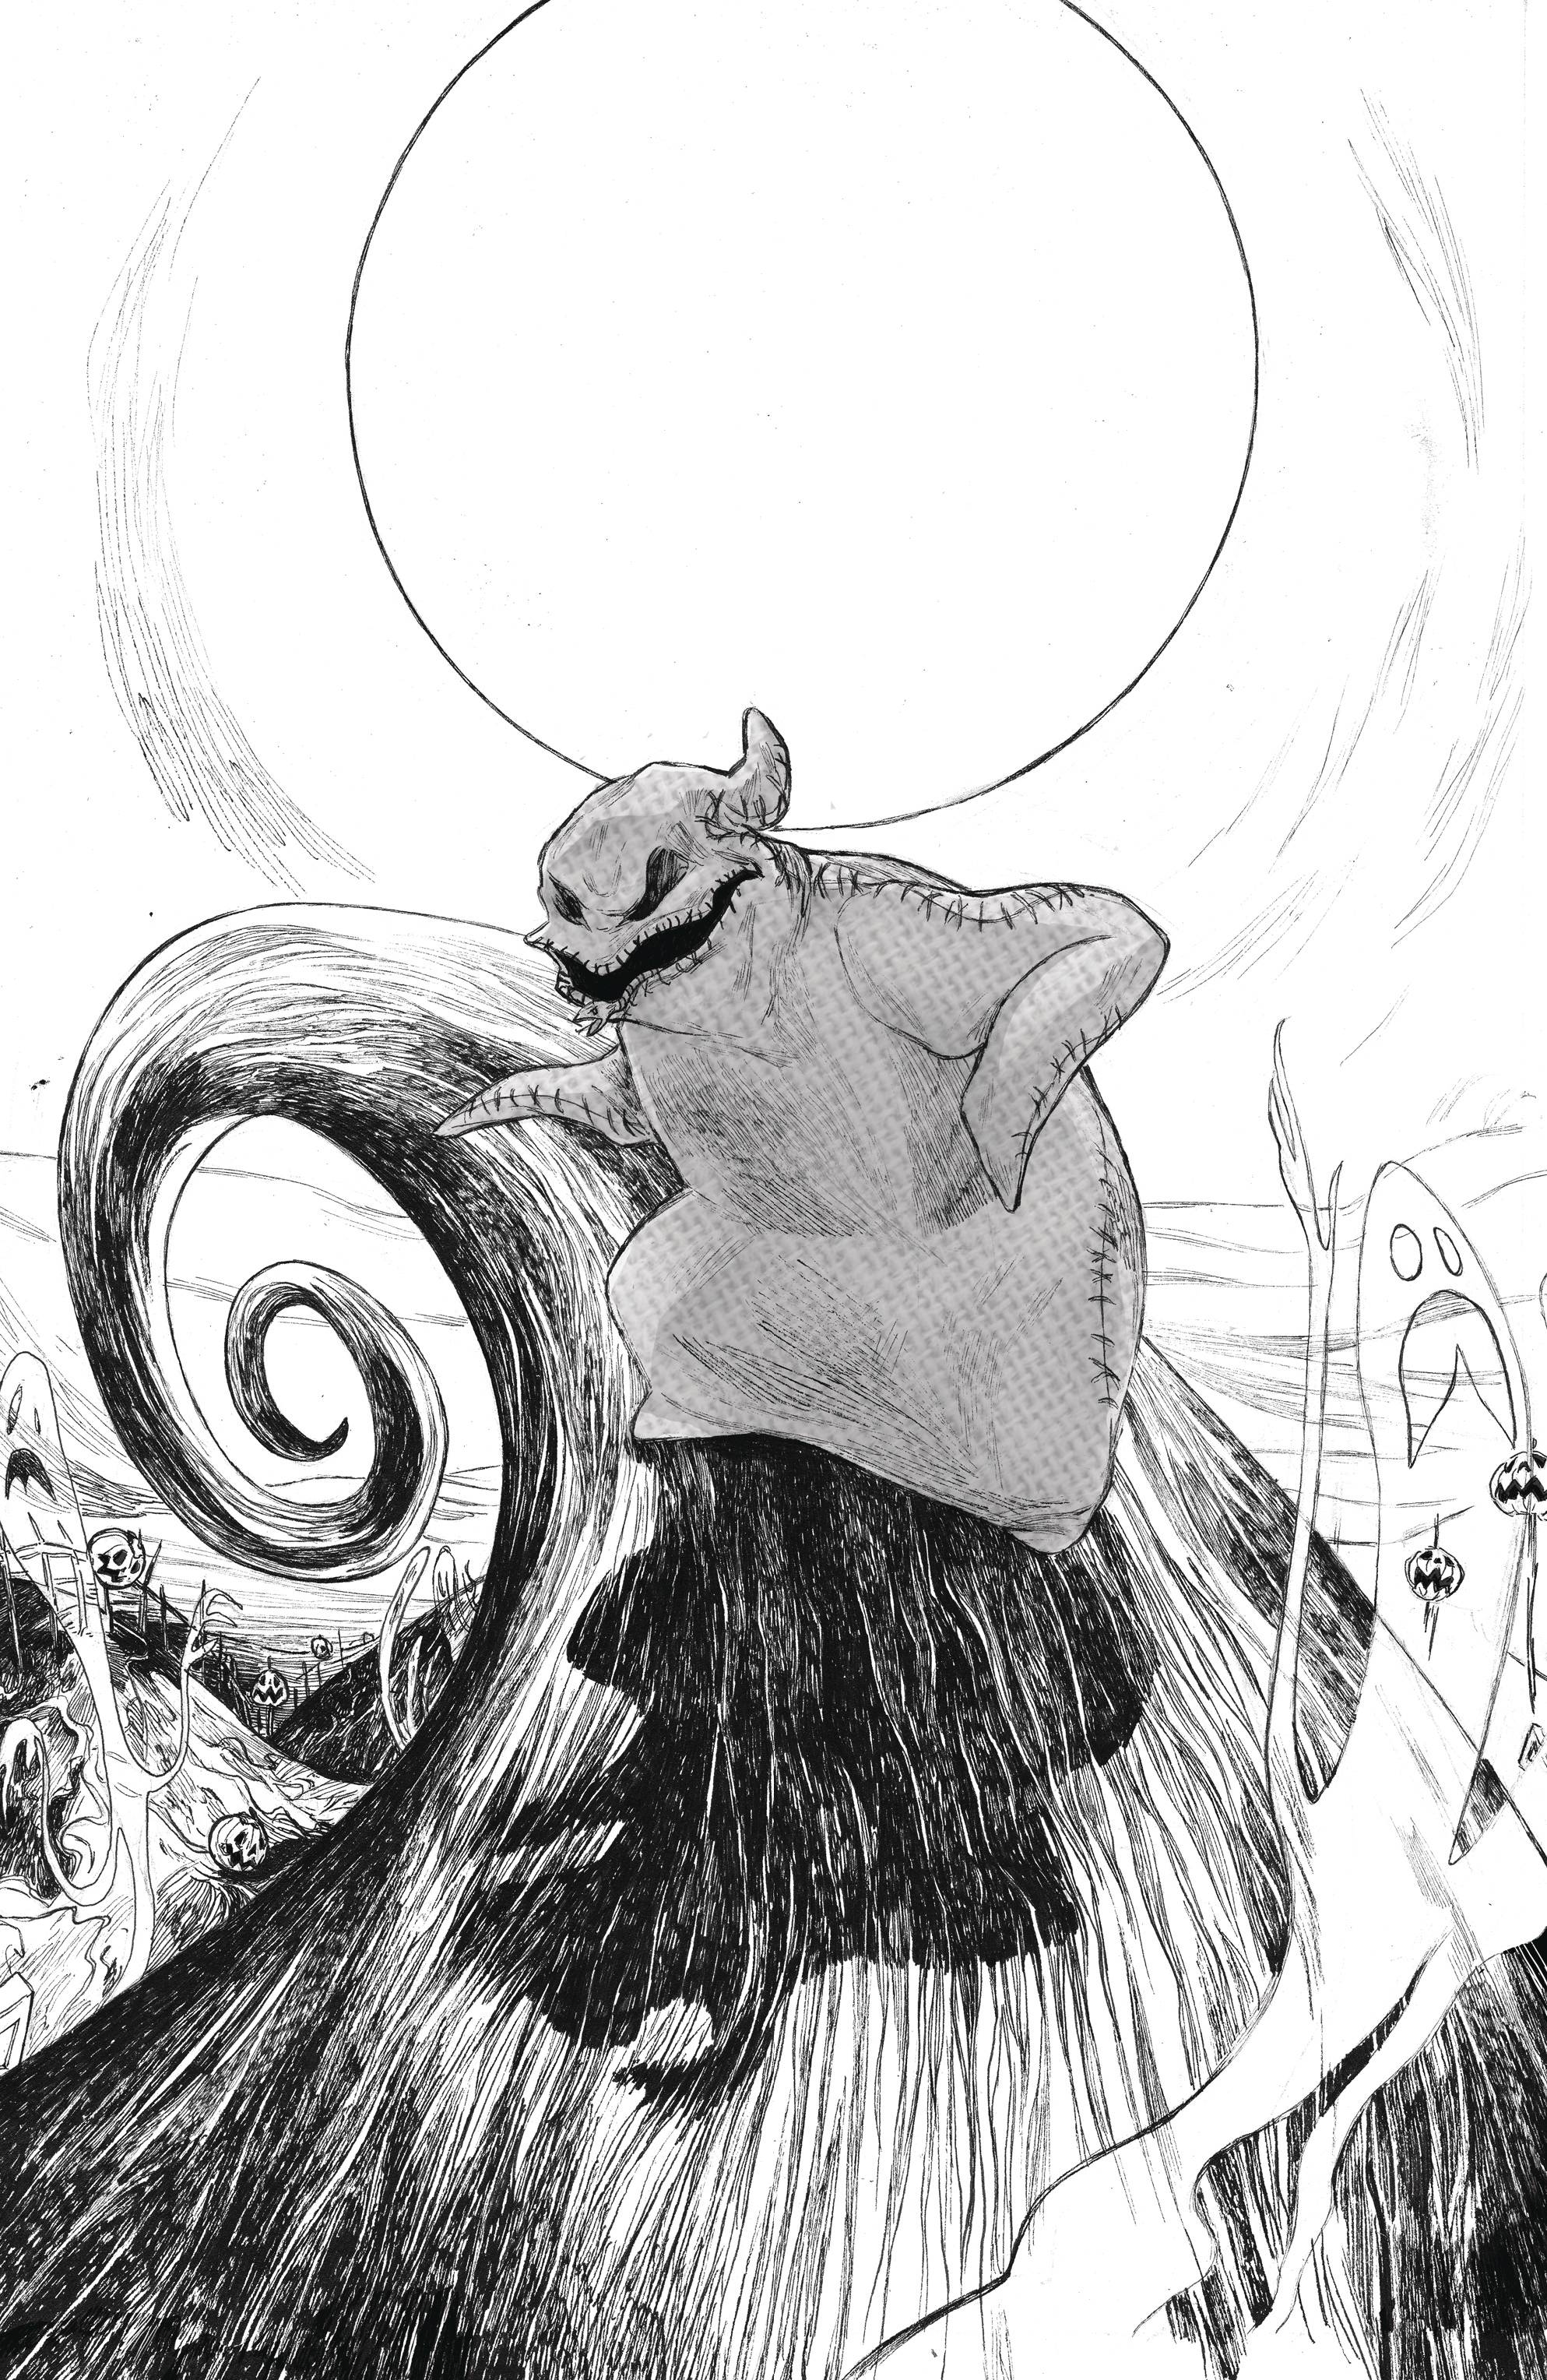 The Nightmare Before Christmas: The Battle For Pumpkin King Graphic Novel